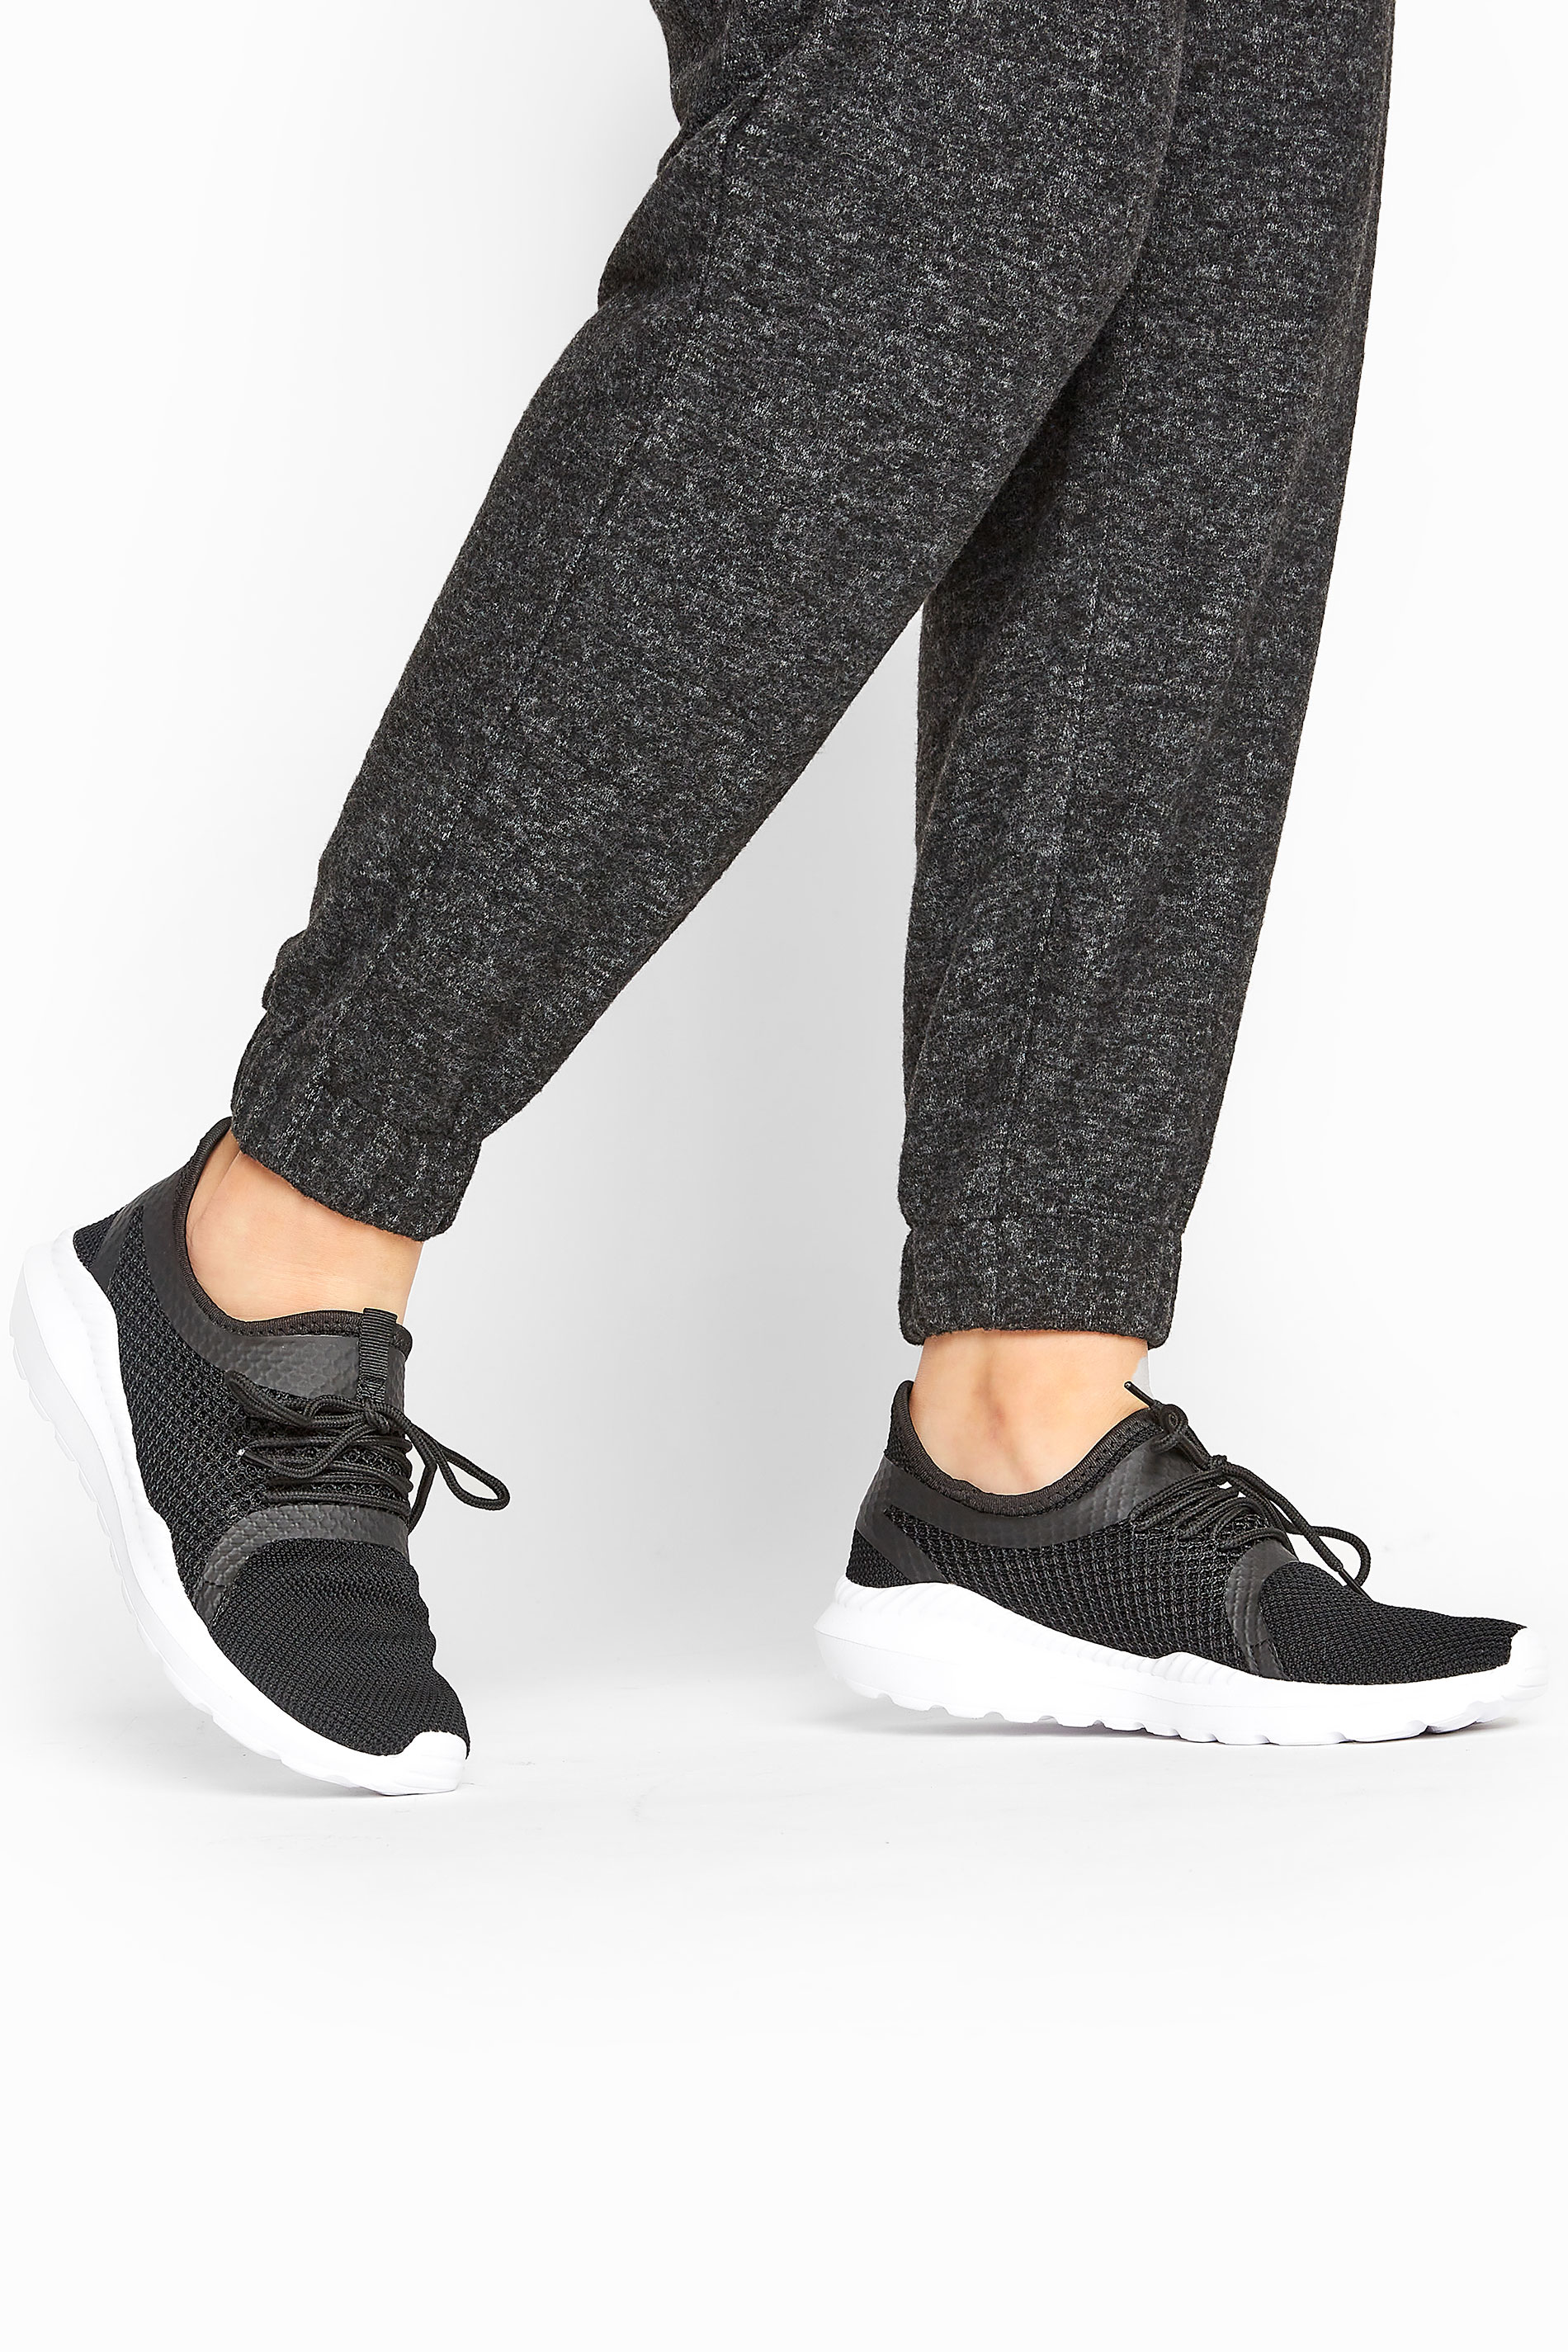 Black Knitted Mesh Trainers In Standard D Fit | Yours Clothing 1